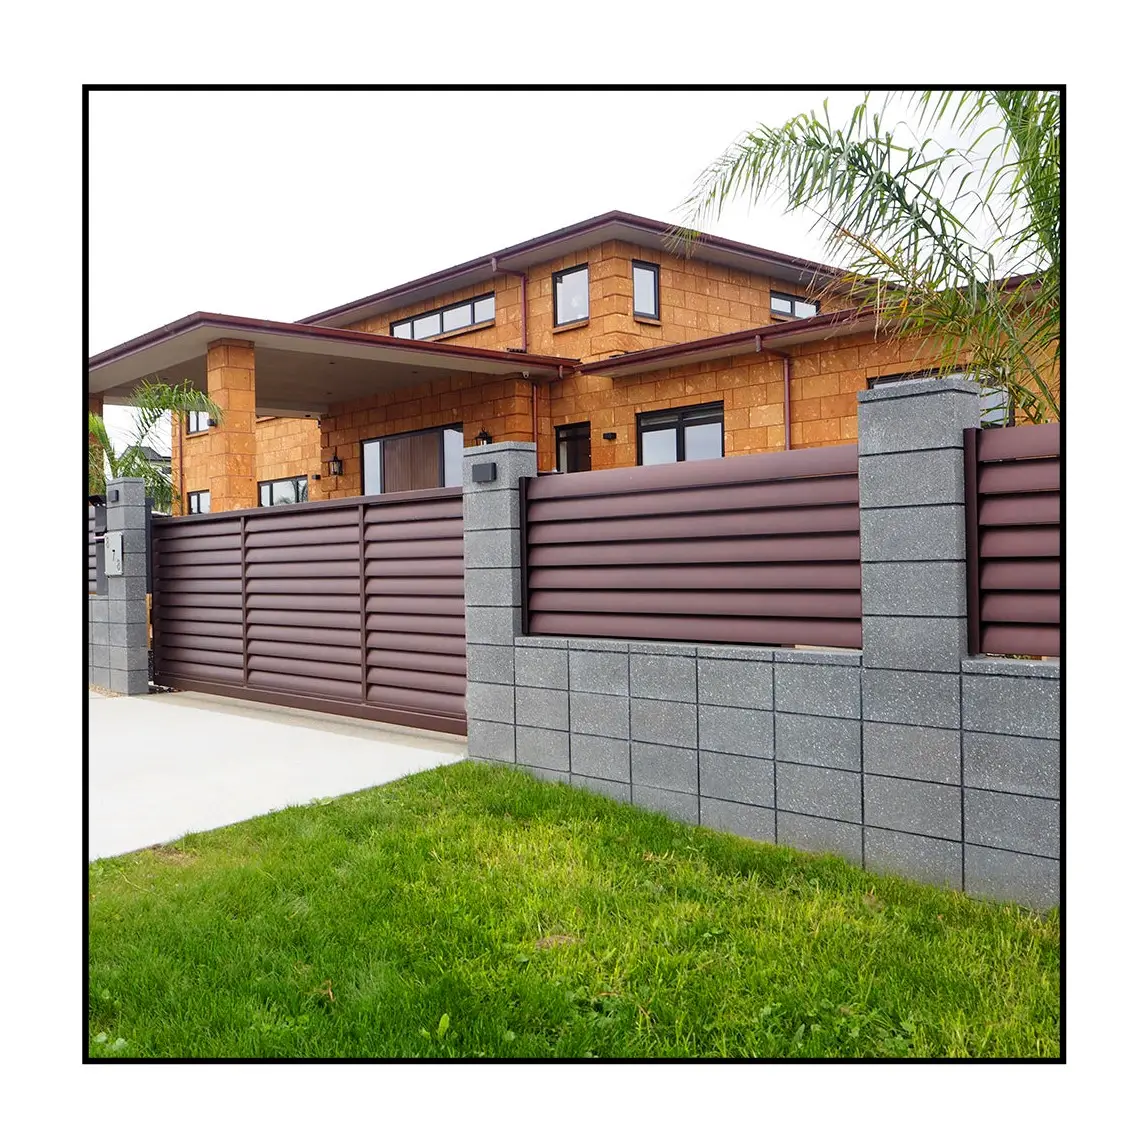 KS METAL Outdoor decorative aluminium louvered fence Horizontal louvre durable metal privacy fence panels Garden fence Outdoor